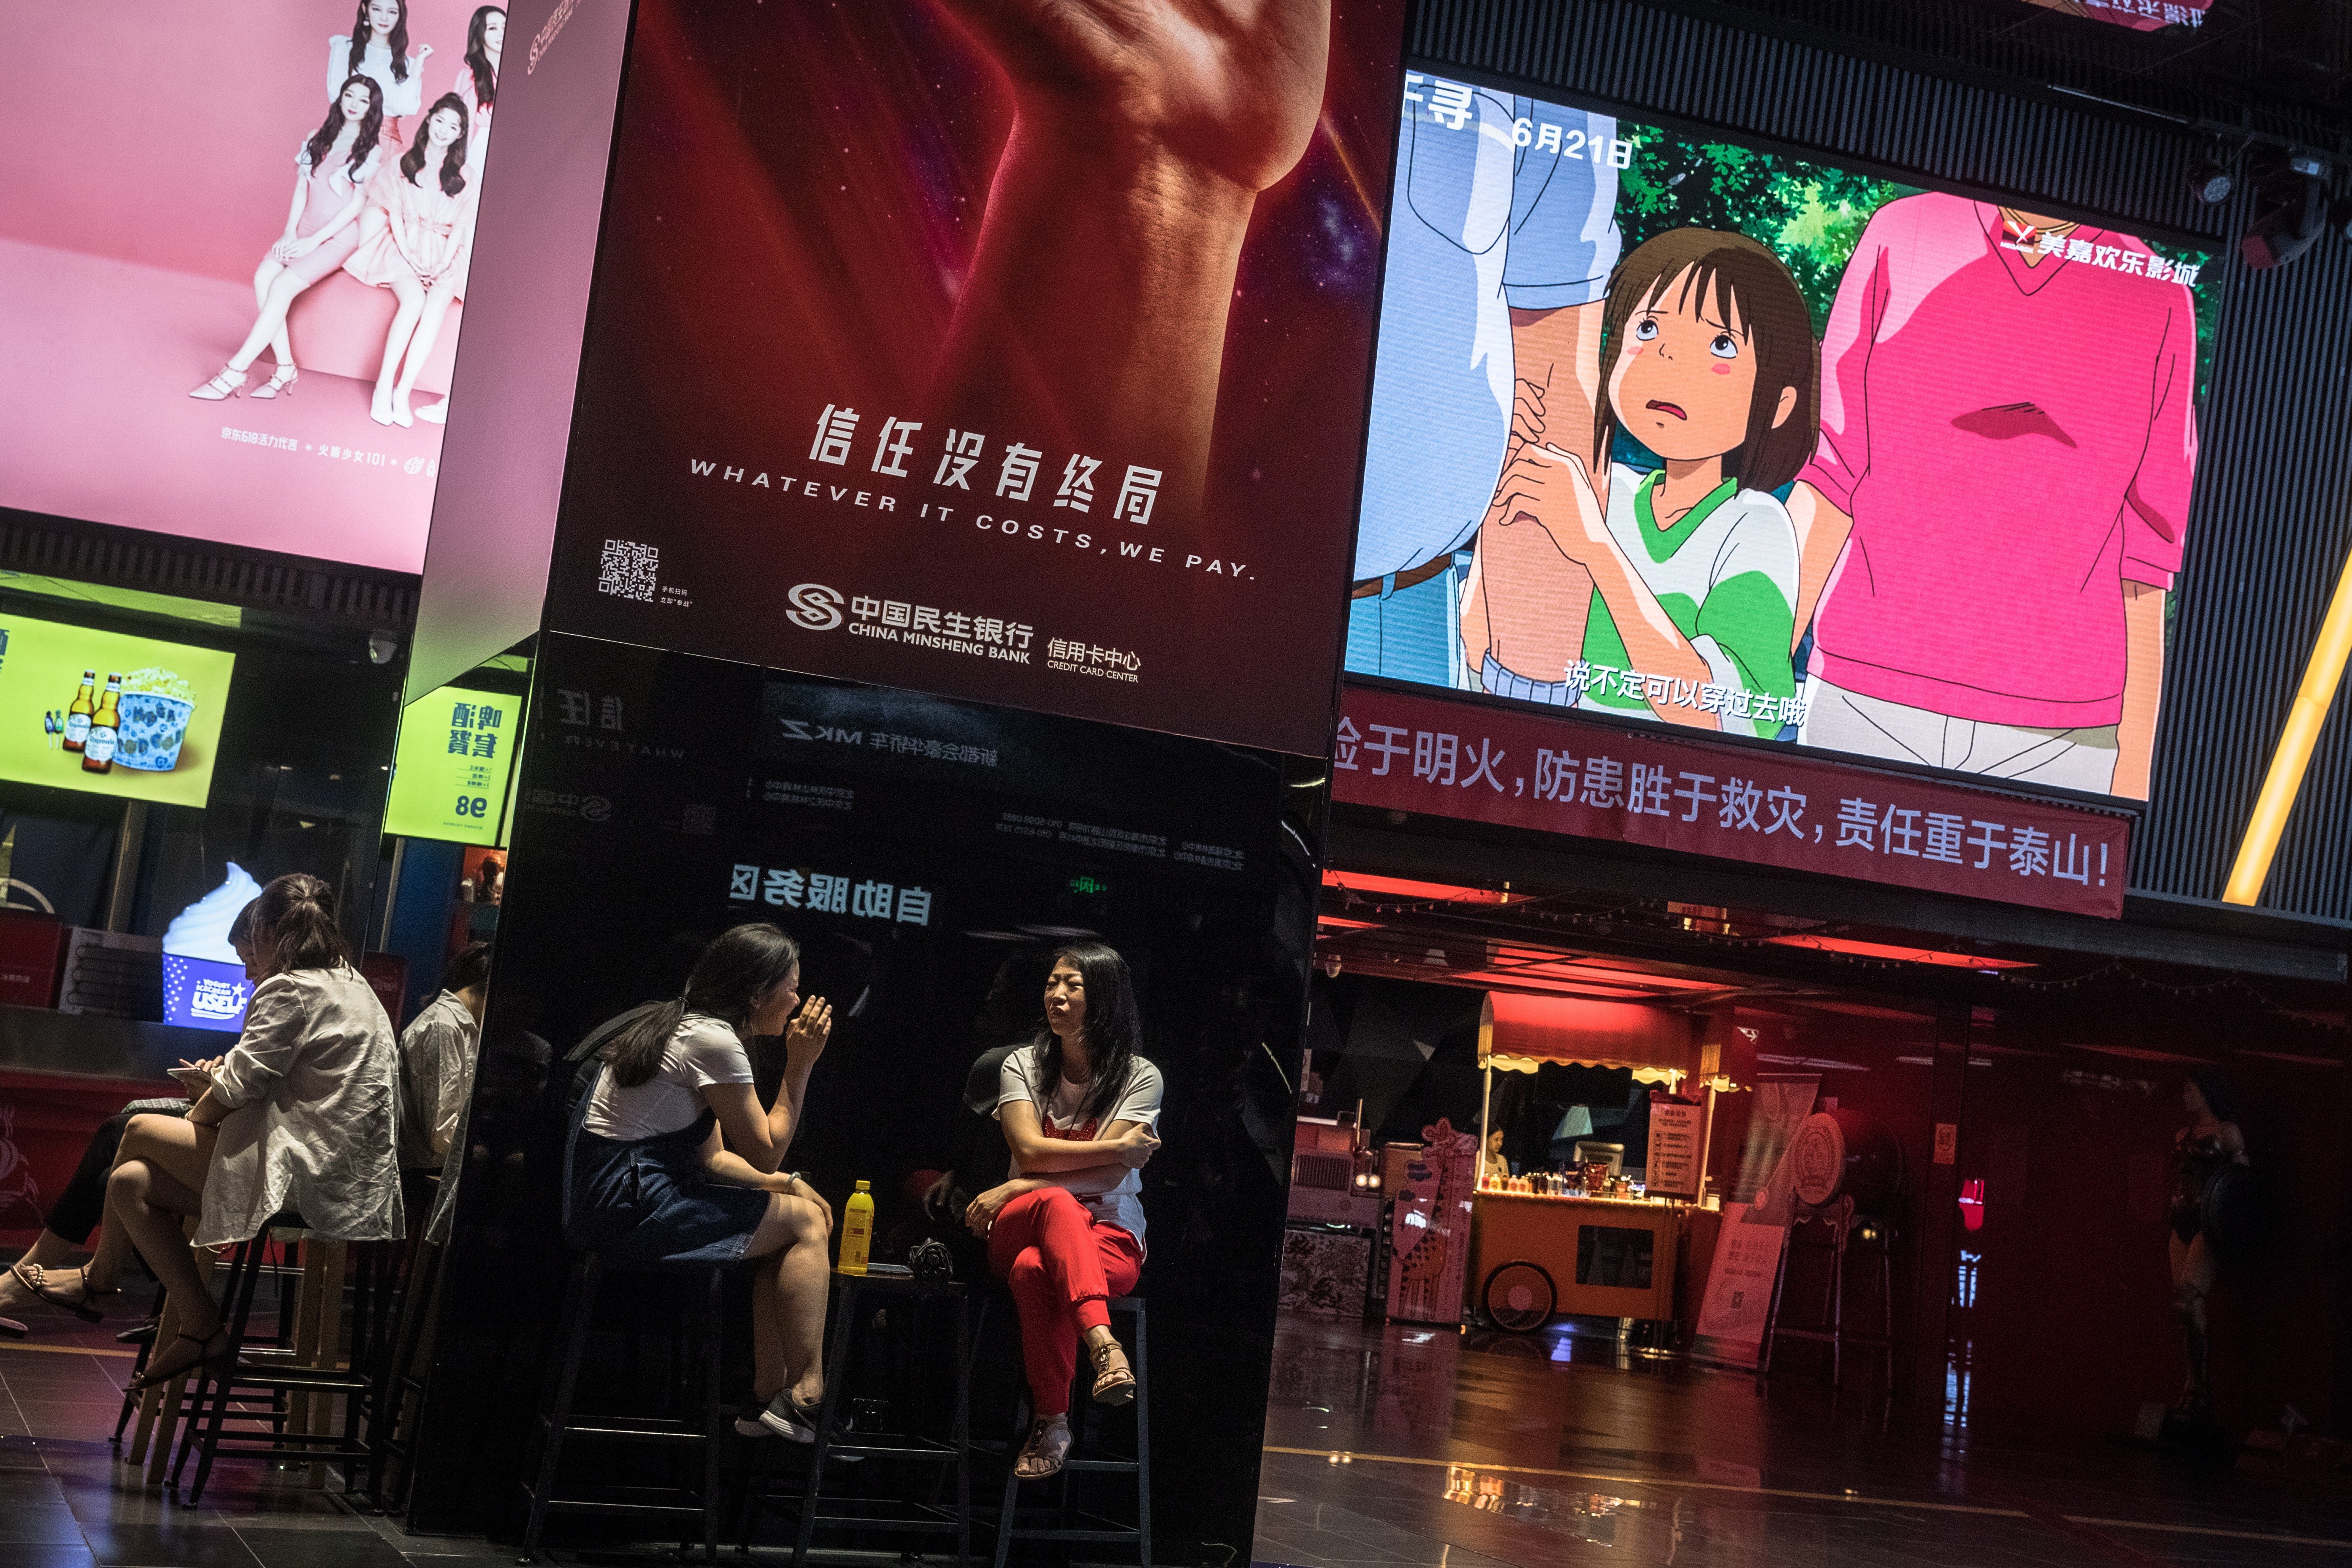 Spirited Away has just been released in China. Photo: EPA-EFE